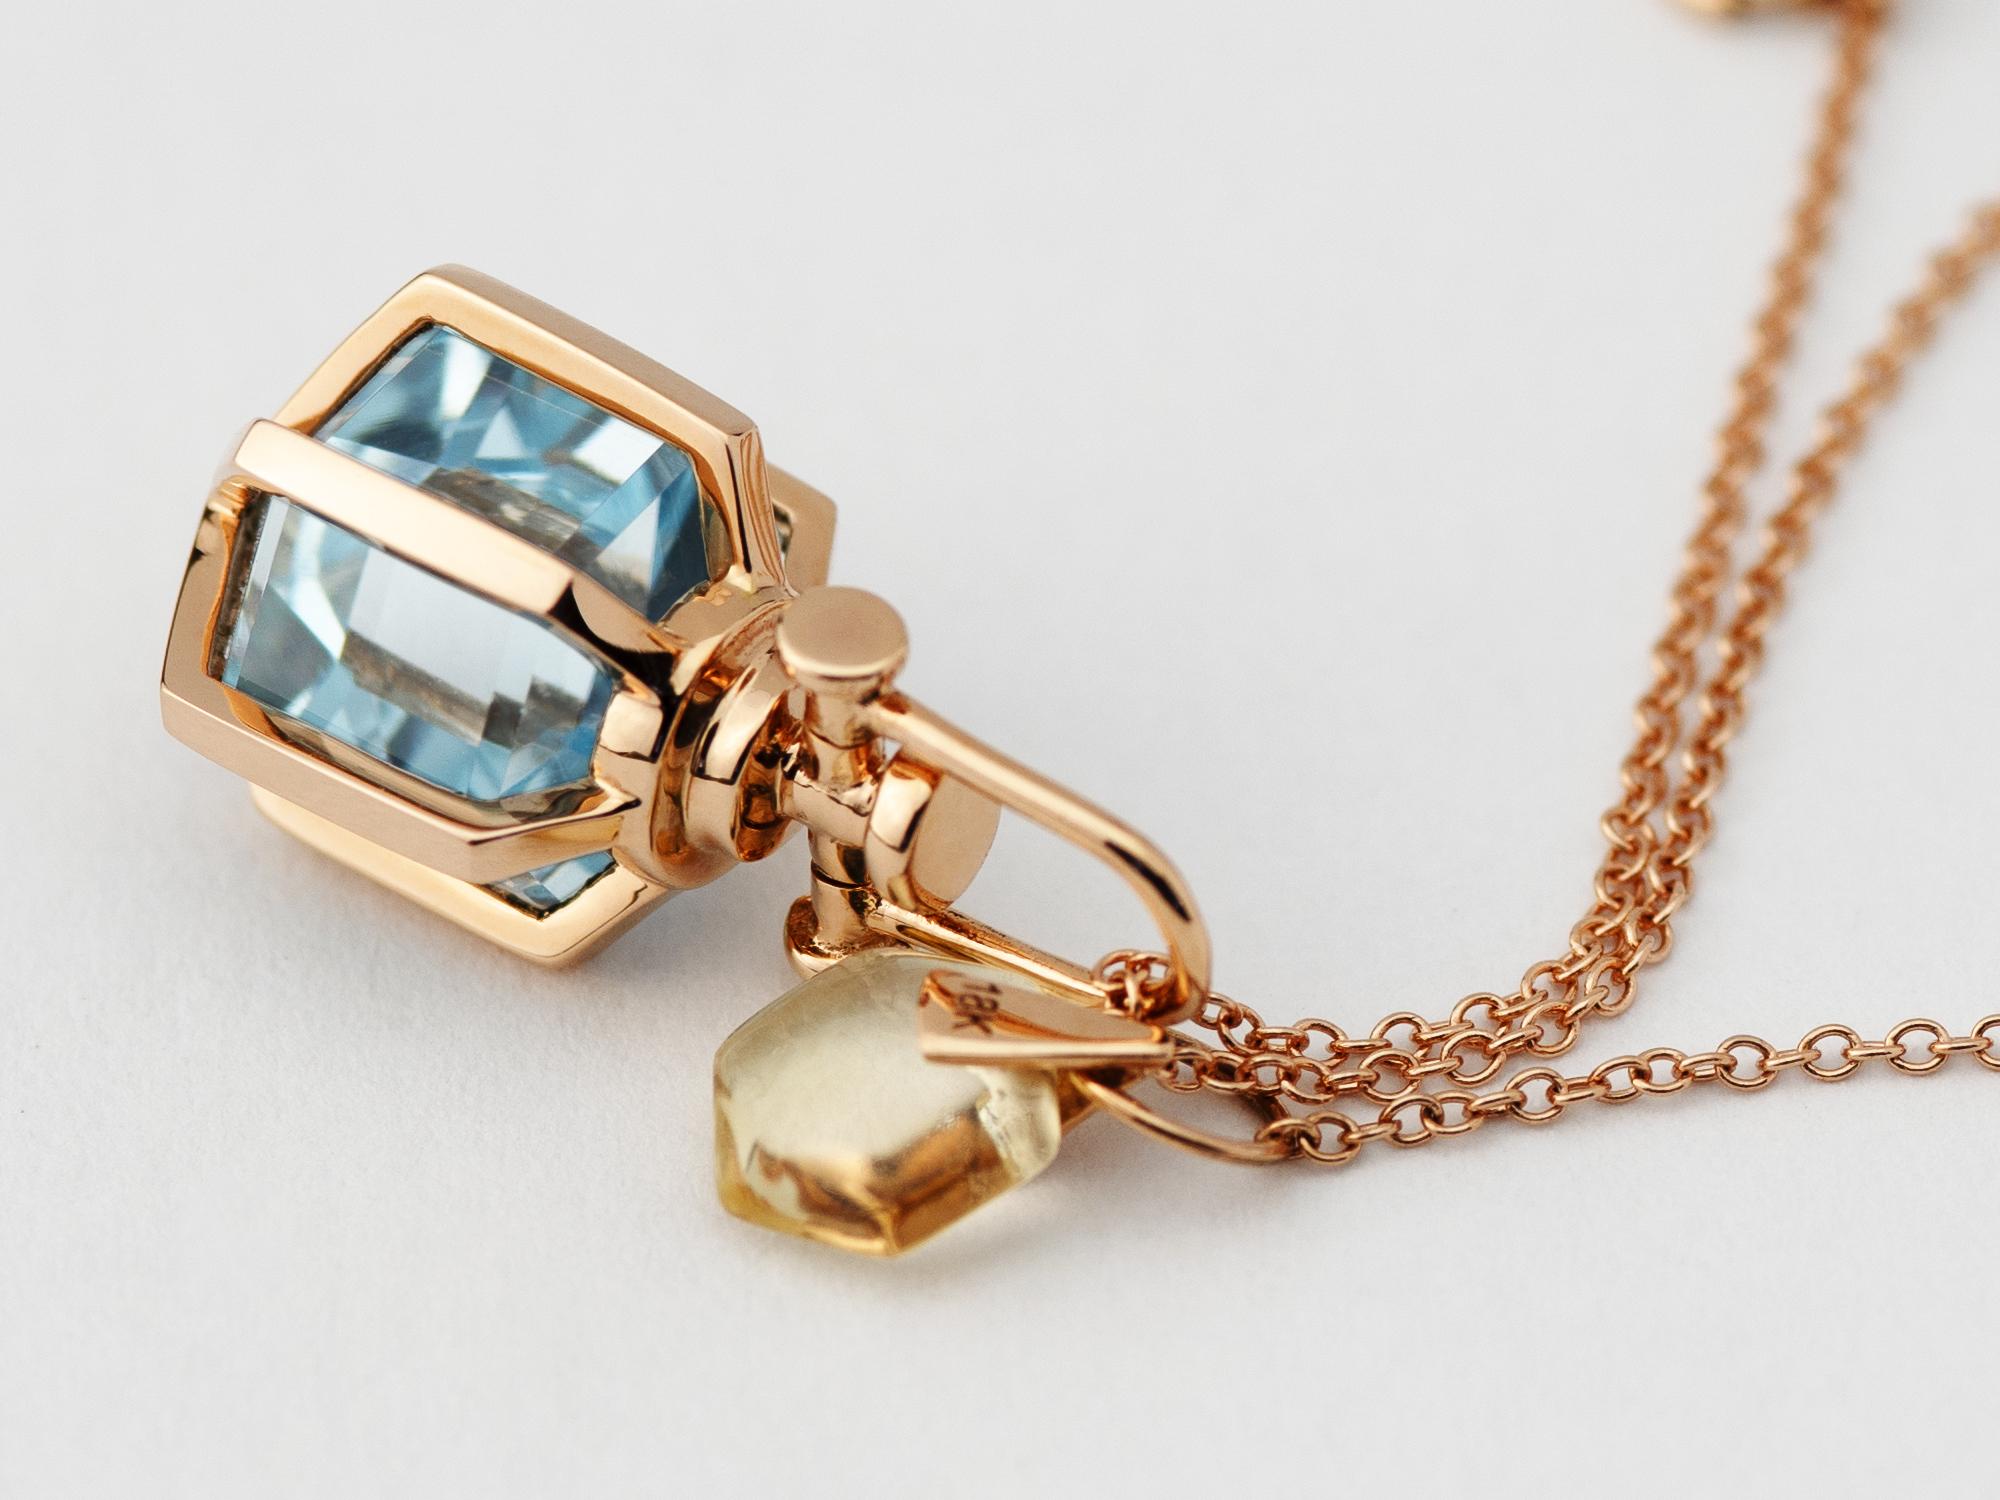 Rebecca Li designs mindfulness.
This elegant dainty necklace is from her signature Six Senses Talisman Collection.

Talisman Pendant :
18k rose gold
Natural healing blue topaz crystal
Pendant size: 10 mm W * 10 mm D * 18 mm H
Blue topaz size:  8 mm